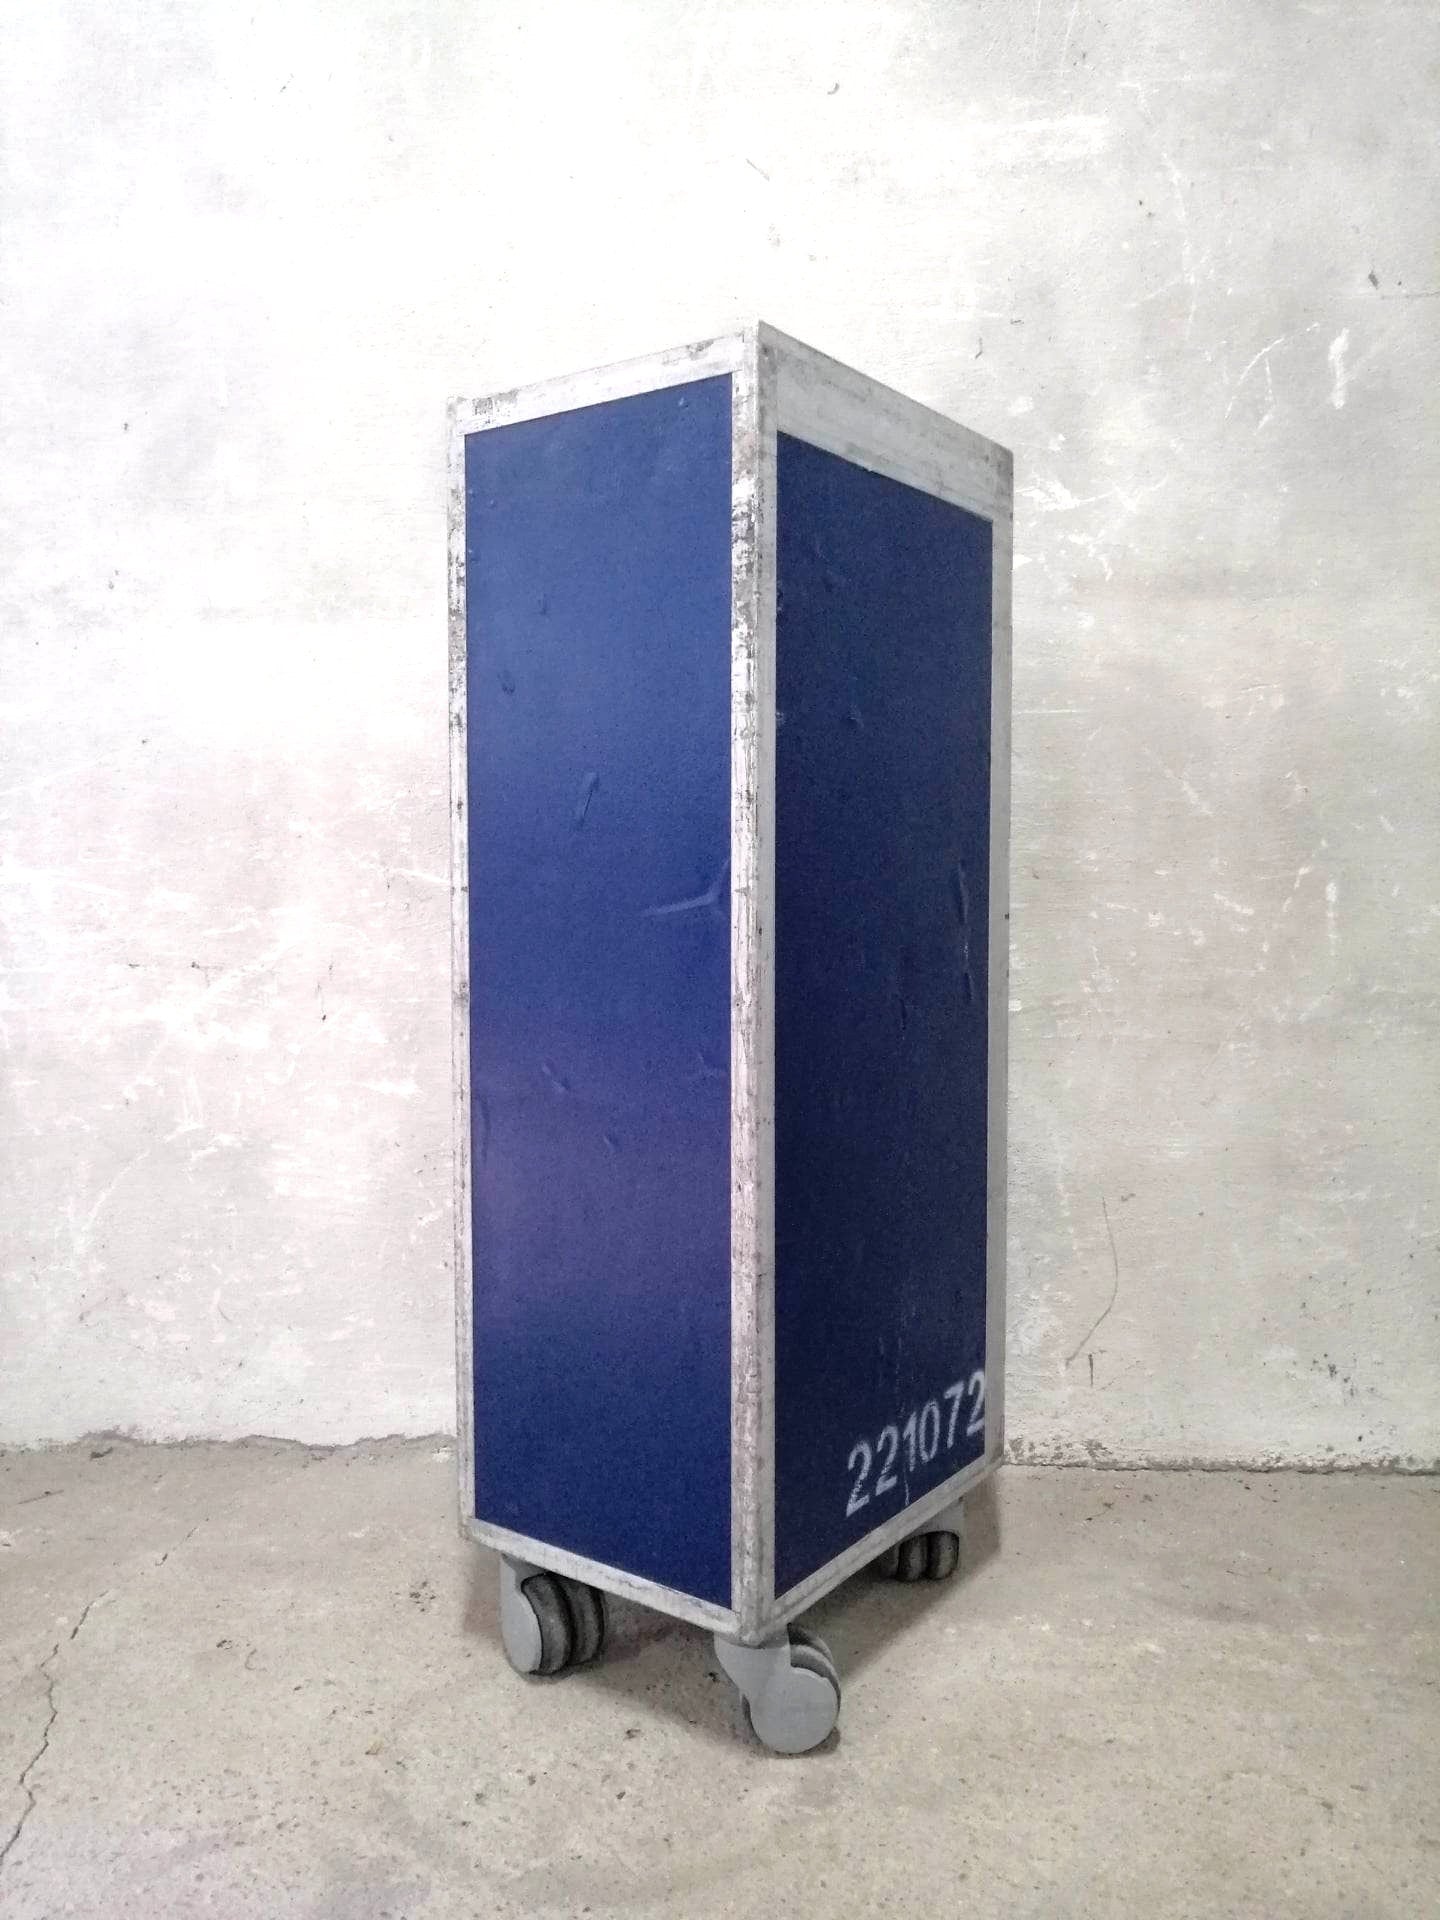 Airline Galley Trolley - LOT - Driessen - Airplane ATLAS Galley Cart with 7 New Drawers - LOT Polish Airlines - Home Bar Catering Trolley